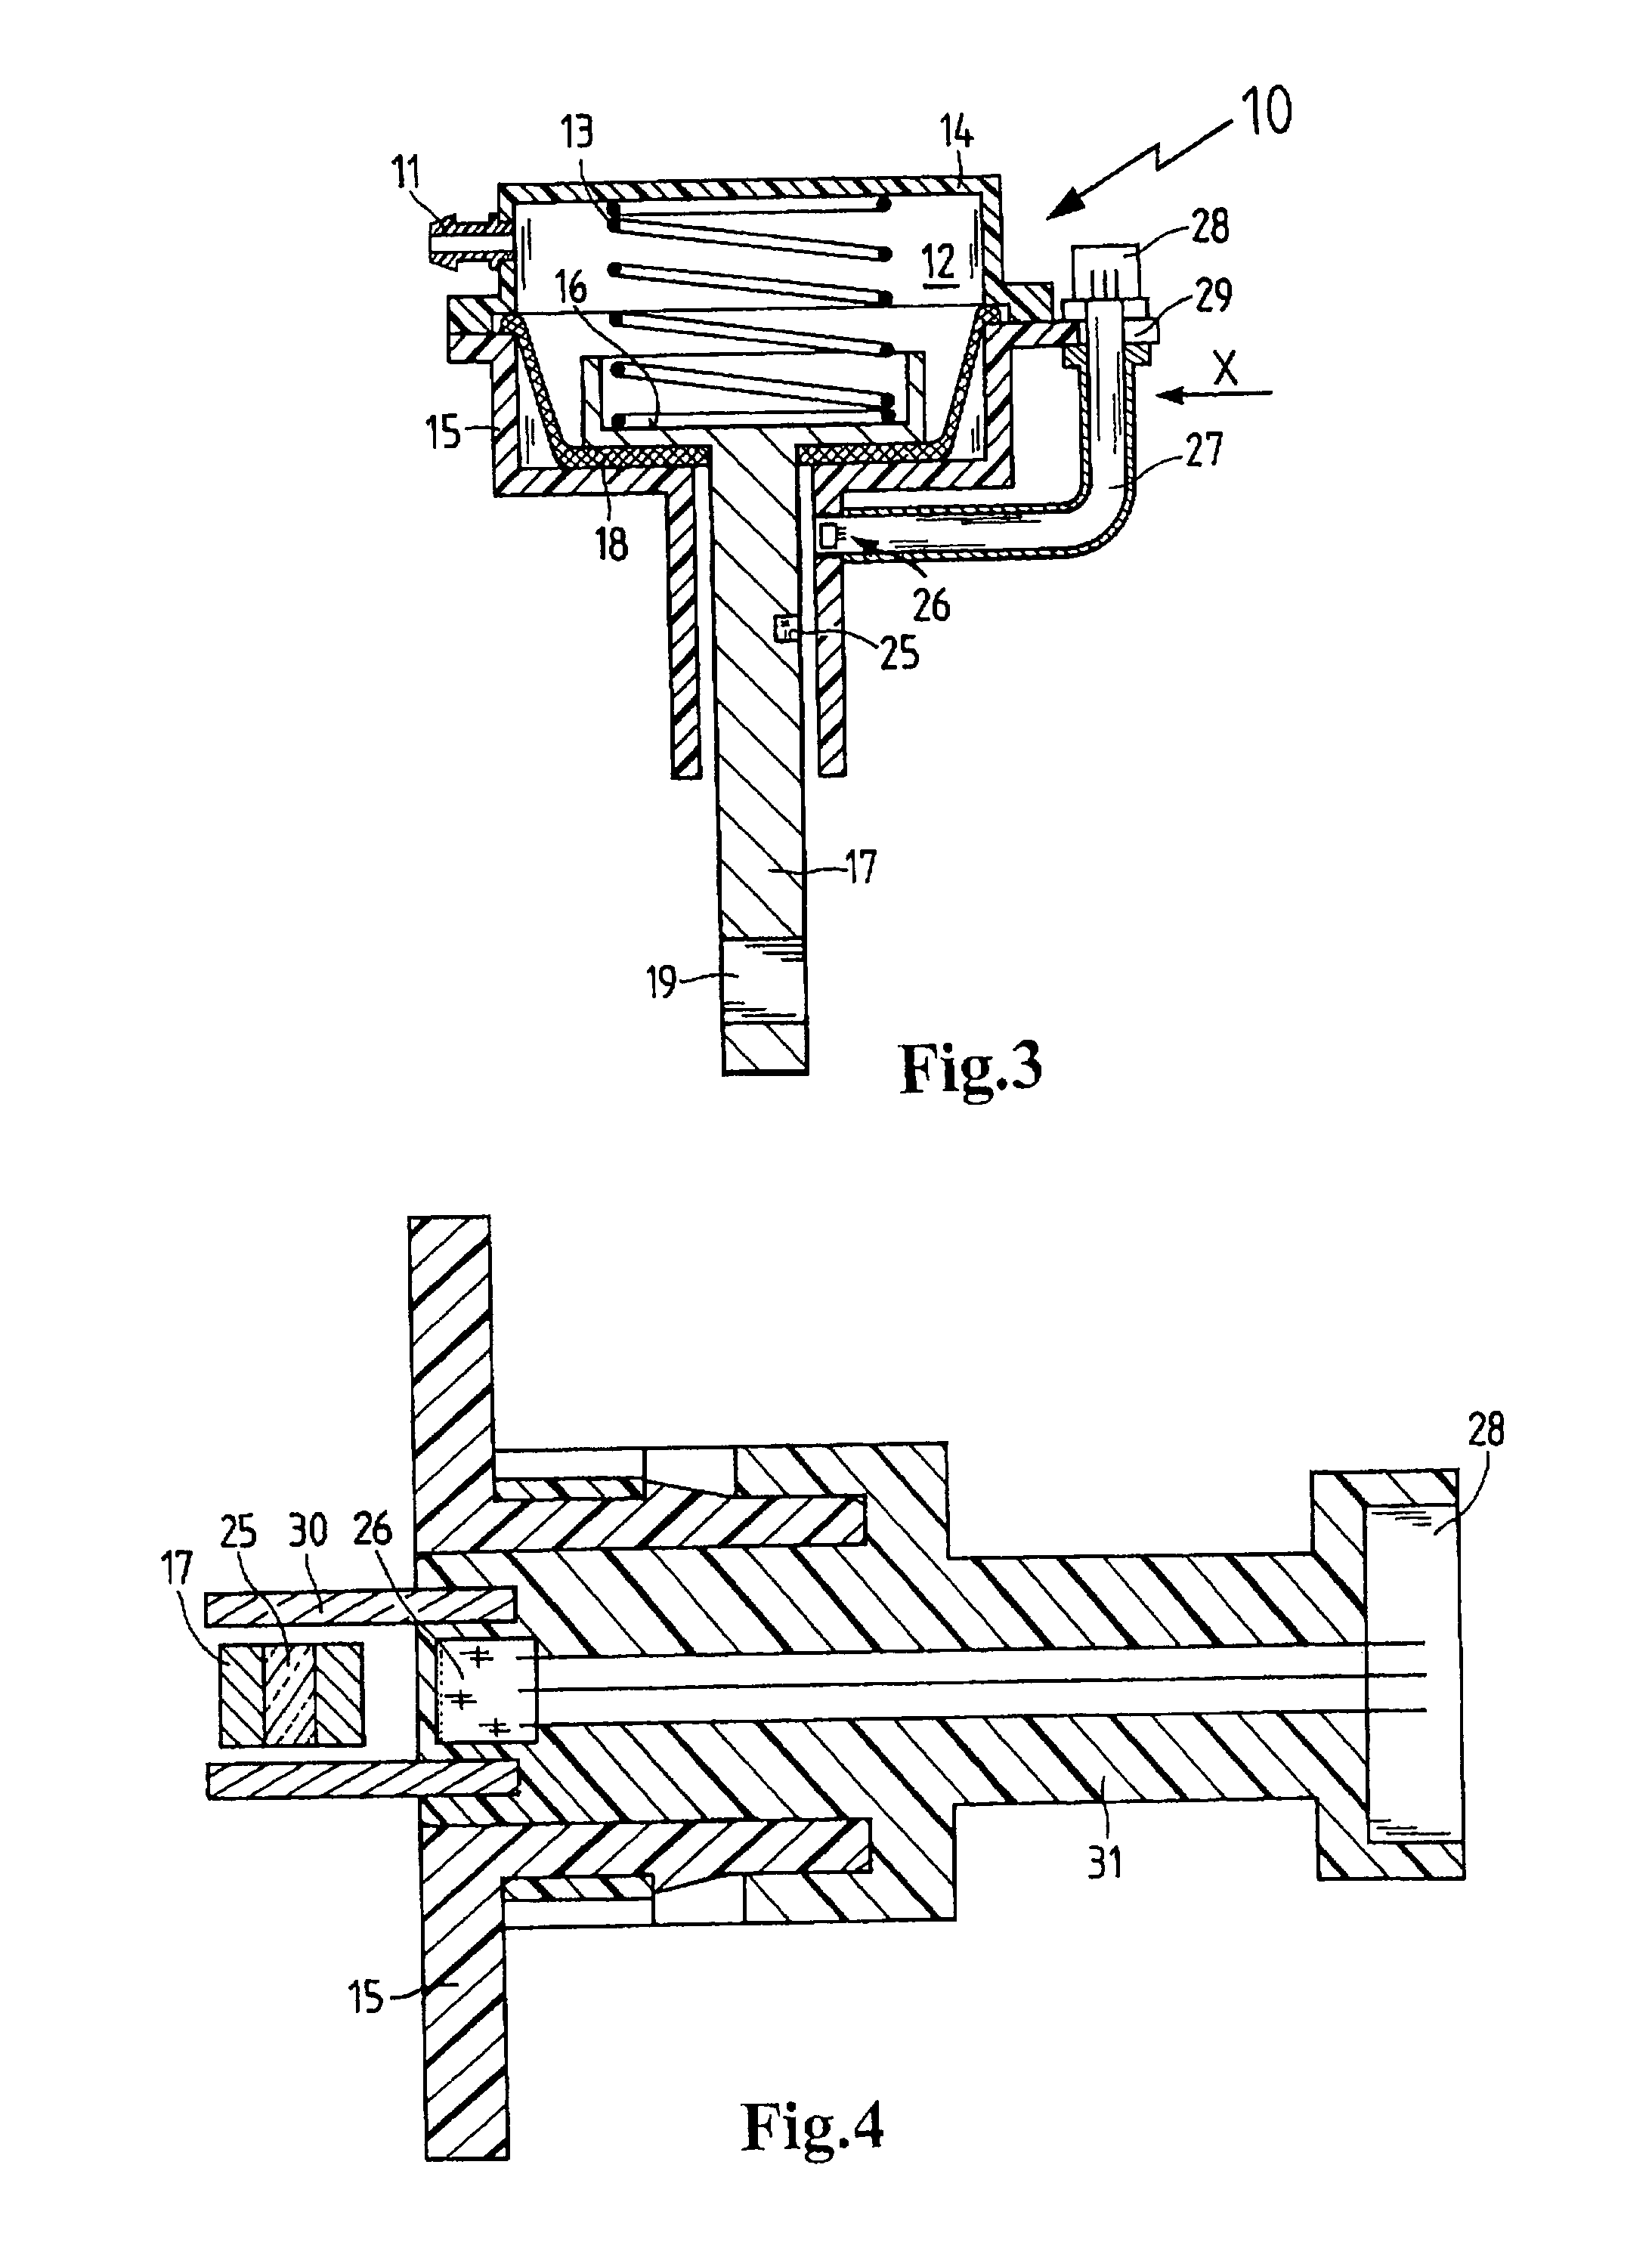 Actuator element with position detection